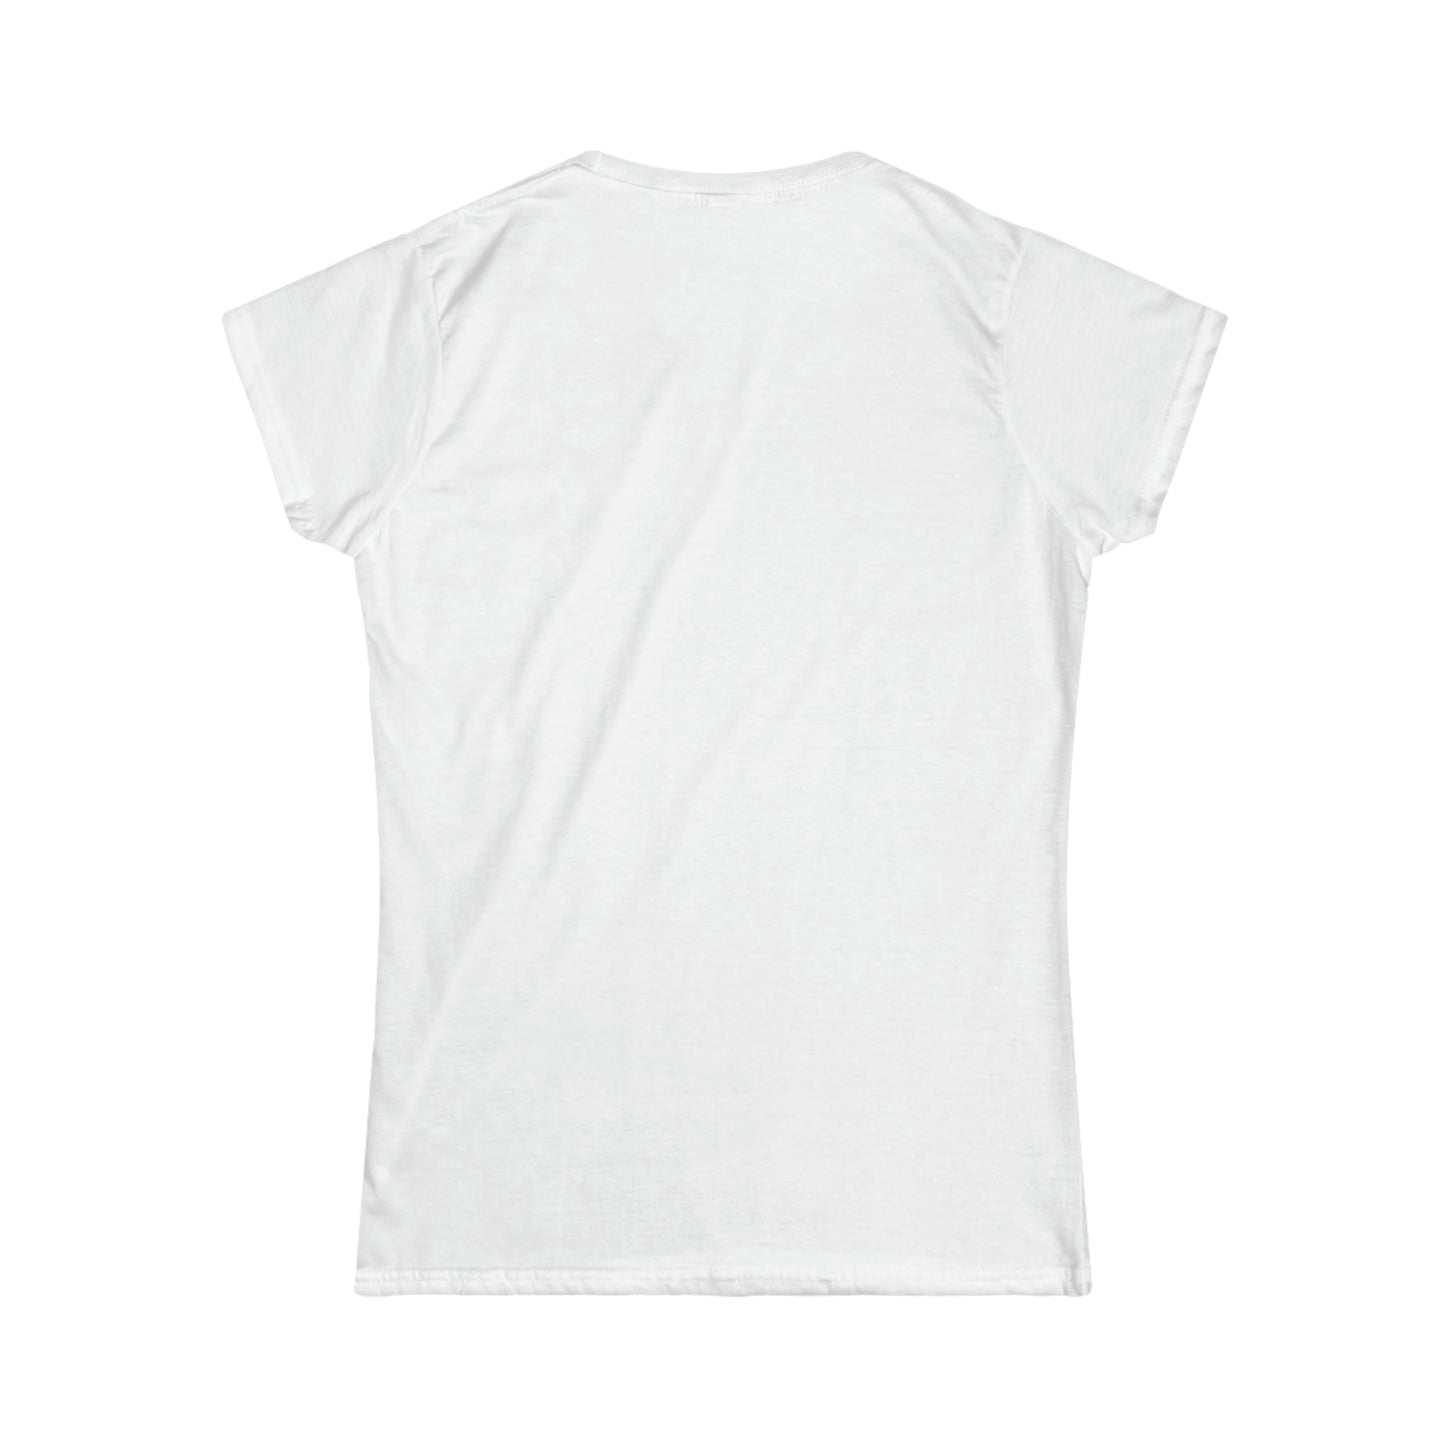 Blessed - Women's Softstyle Tee